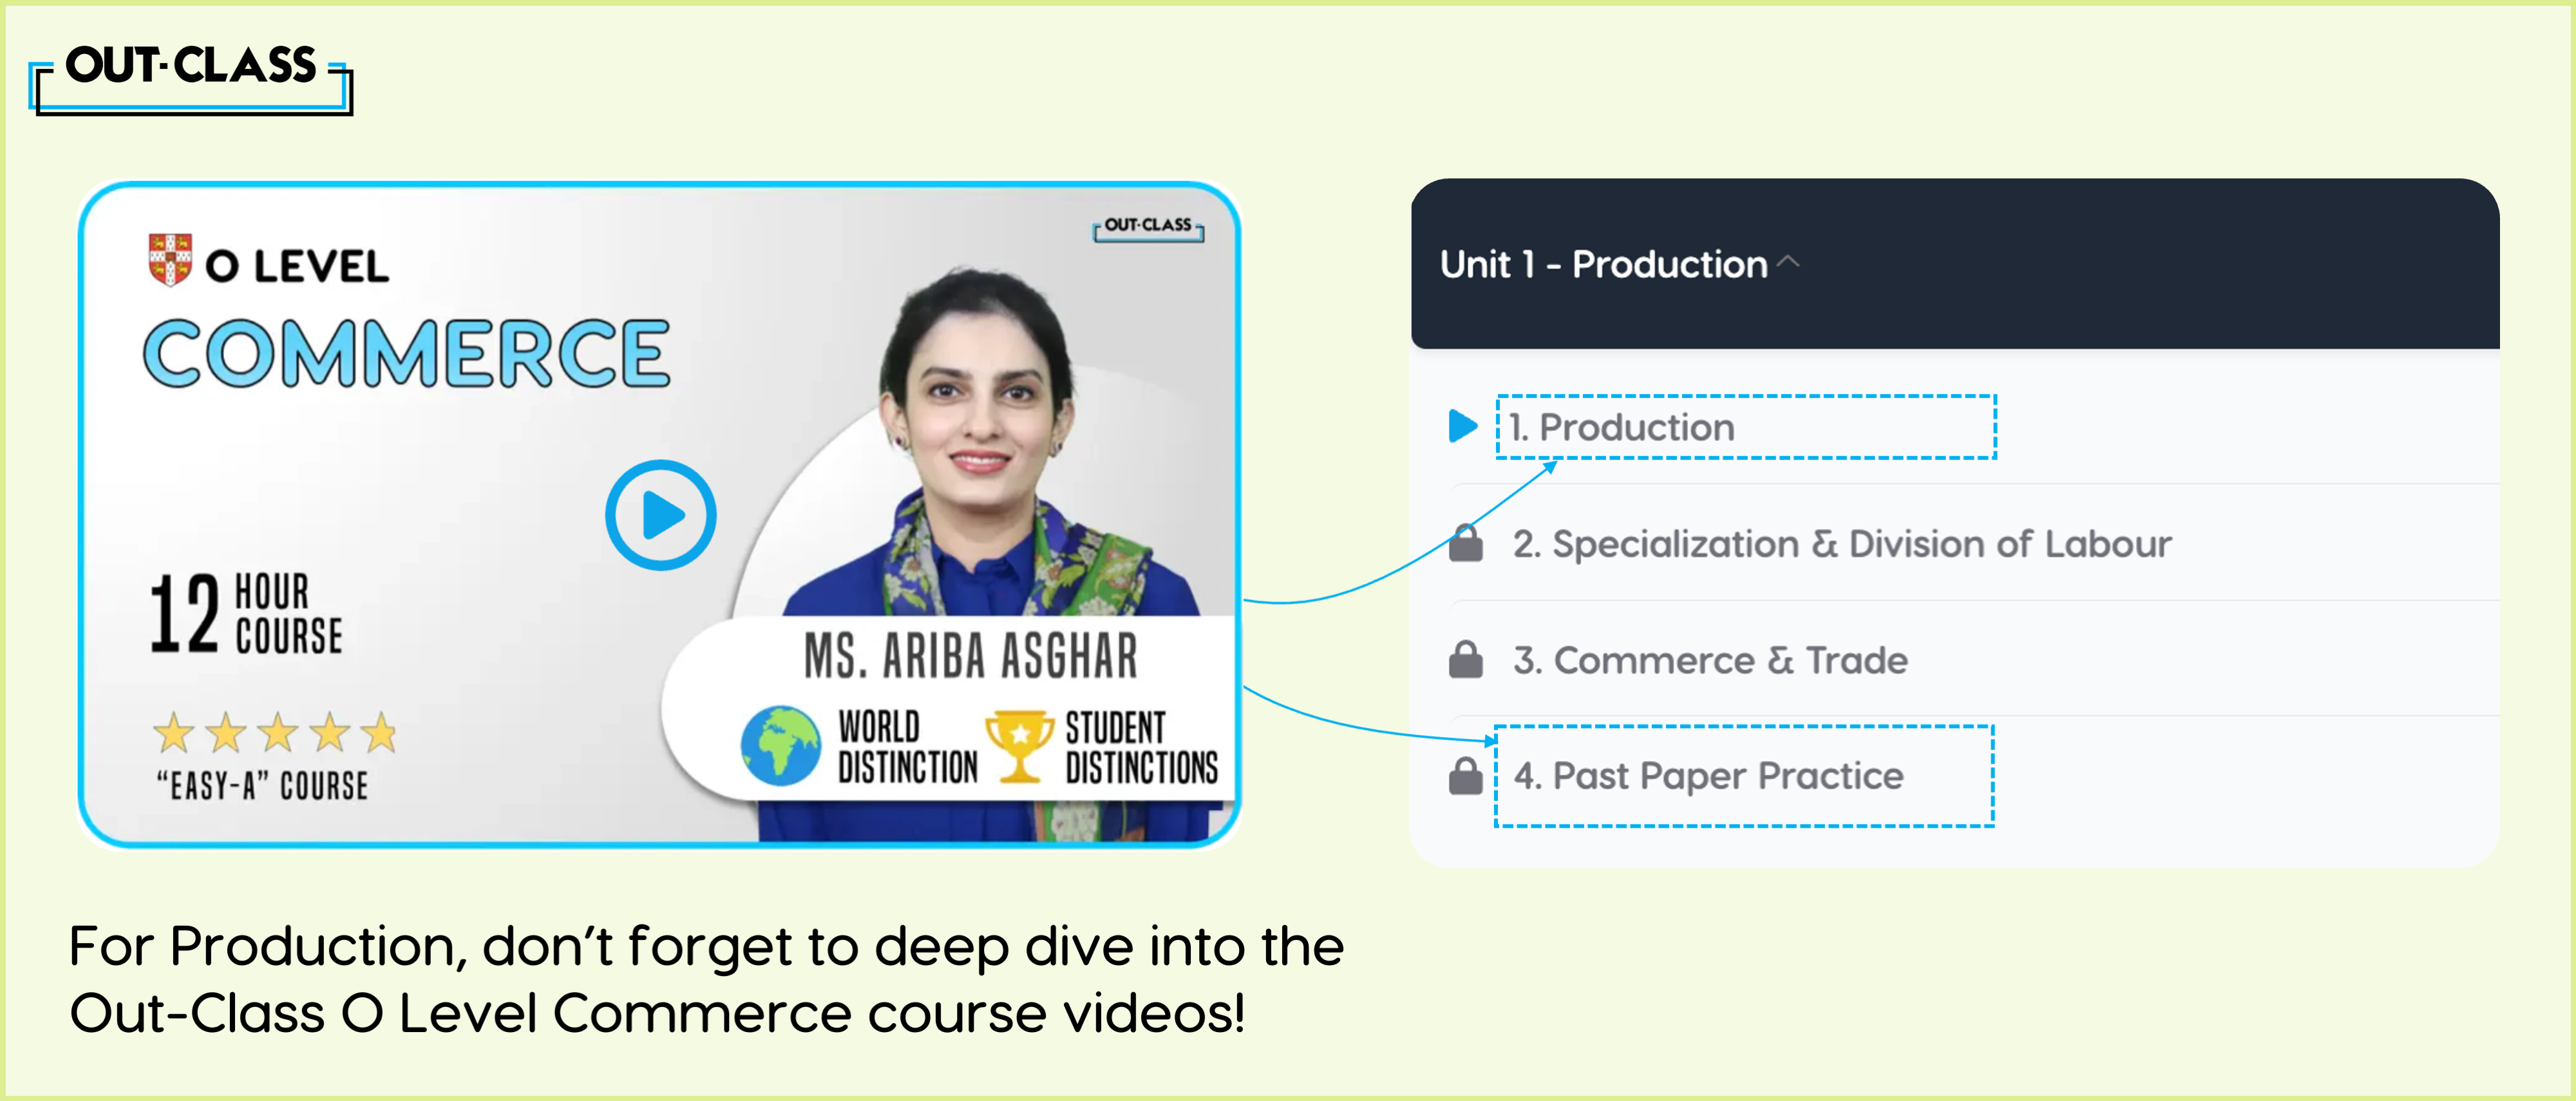 production is the first unit of O Level commerce course.